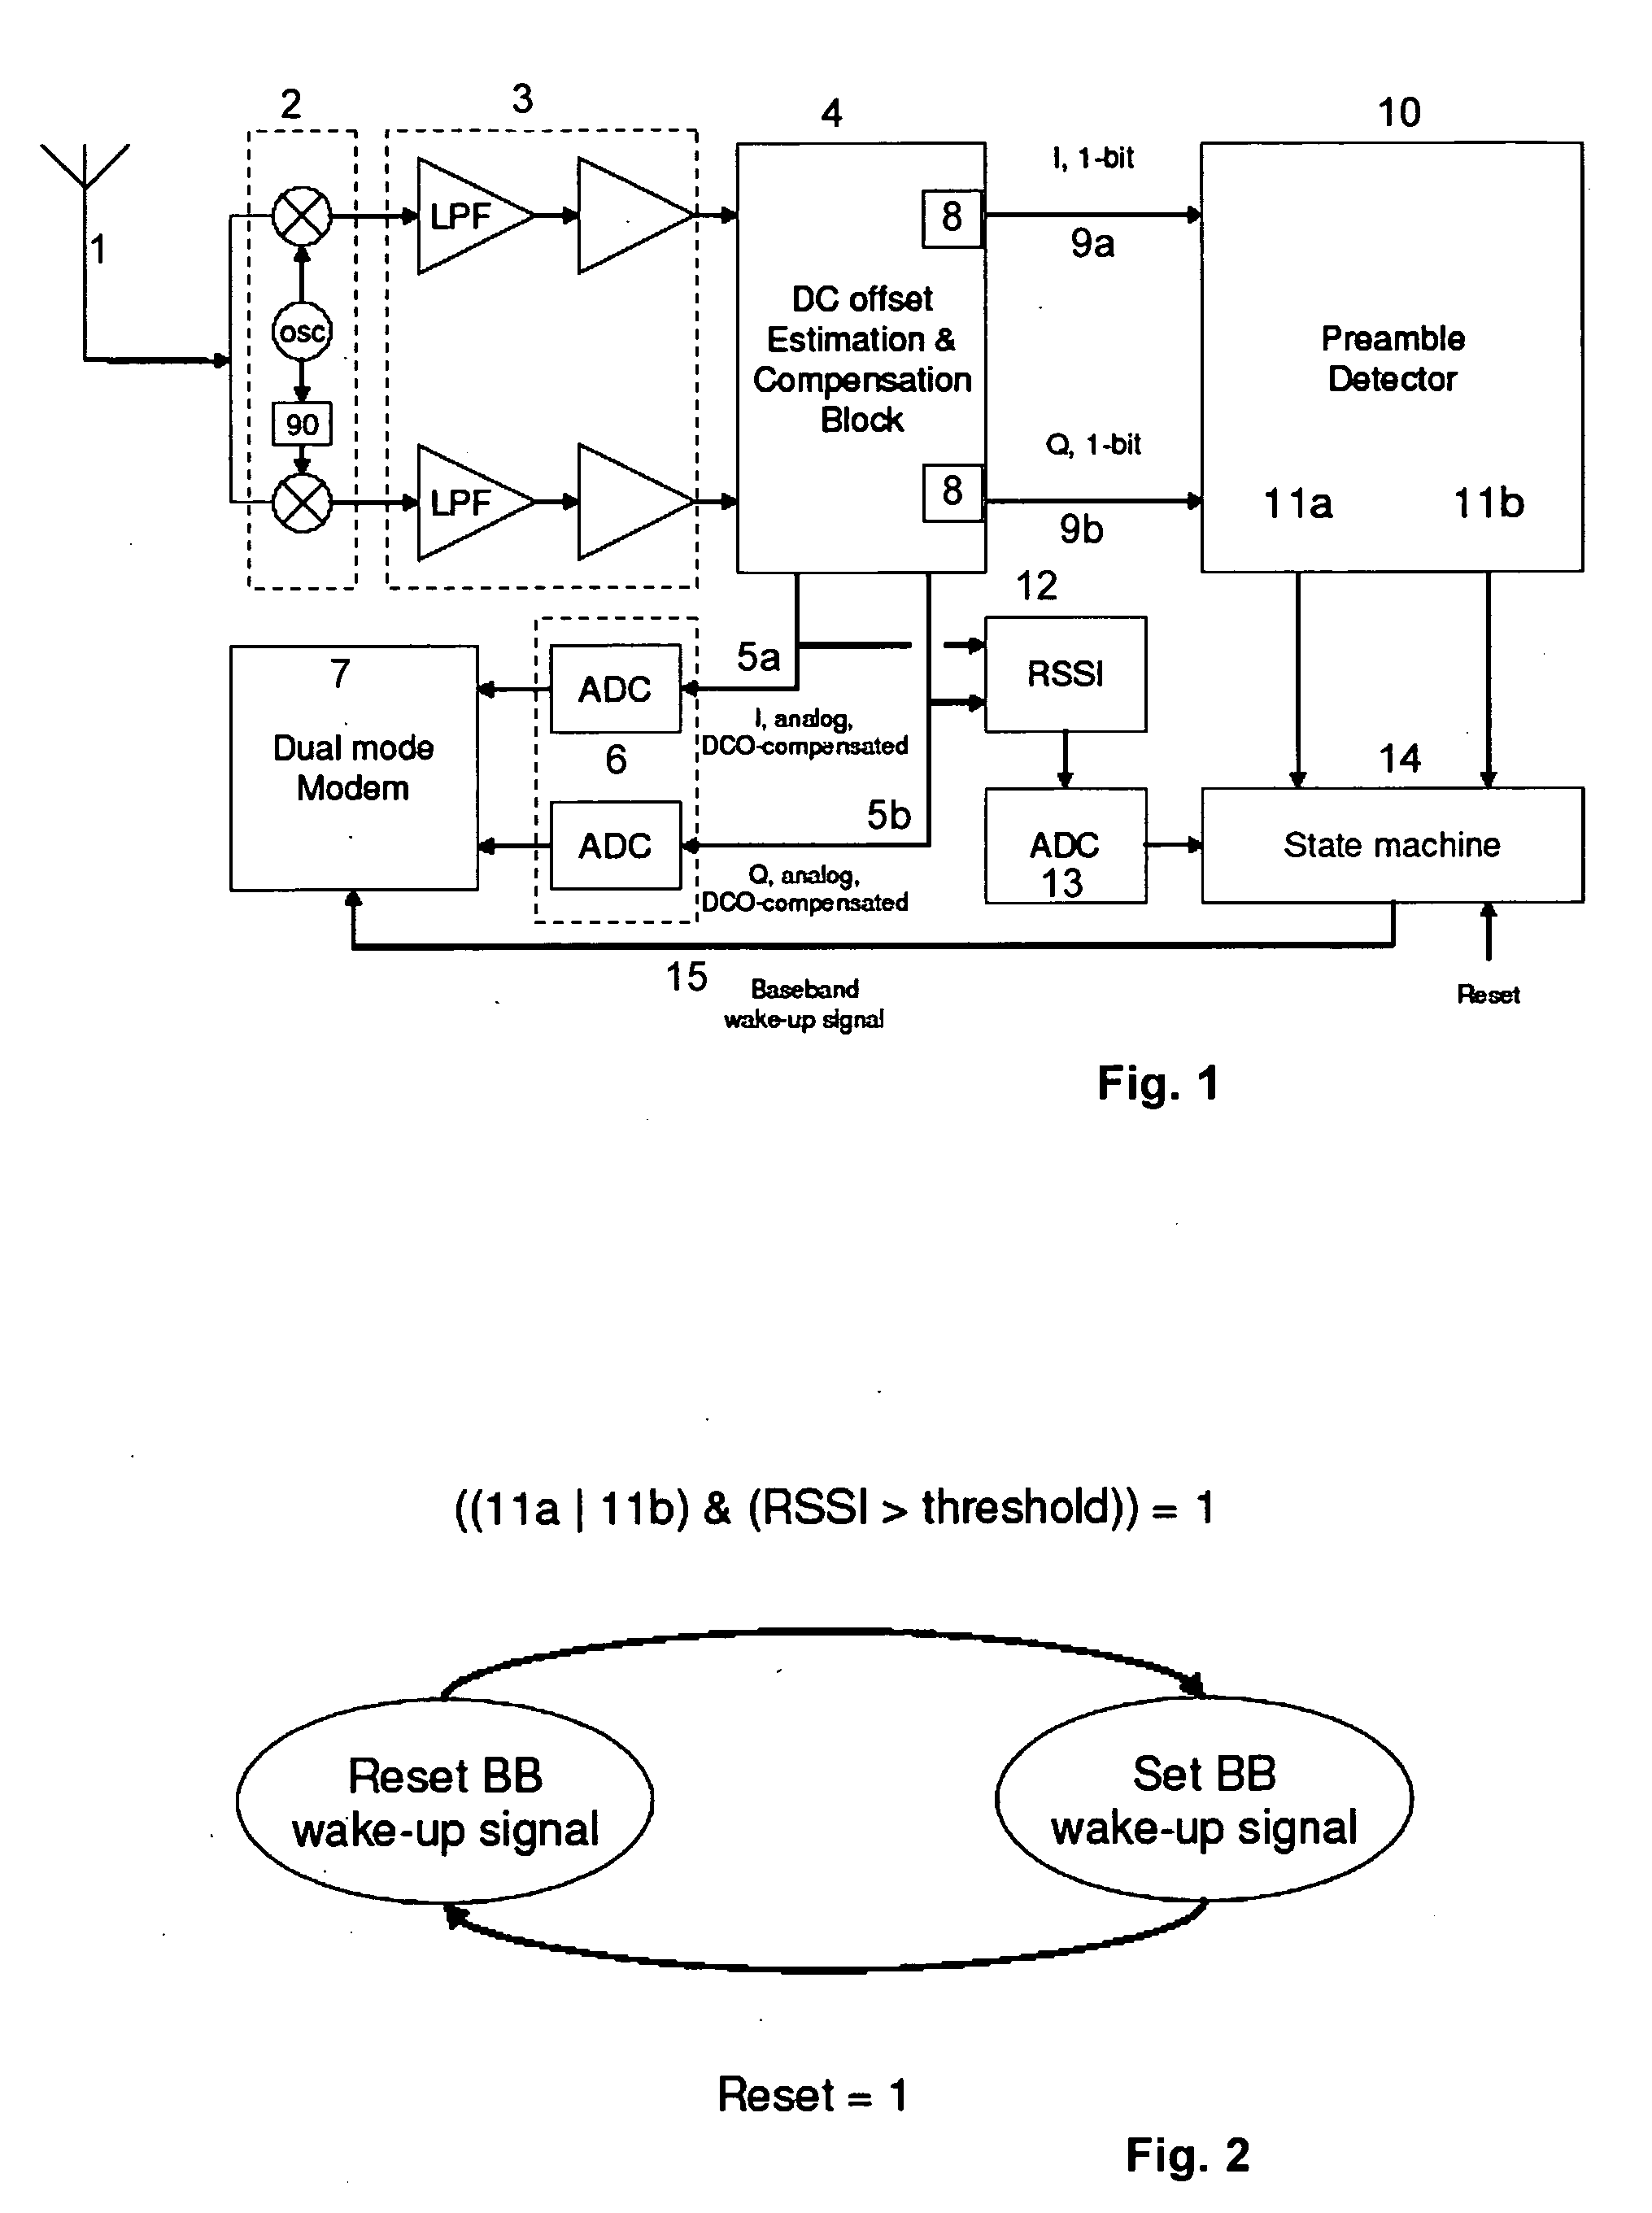 Apparatus and method for detecting preambles according to IEEE 802.11A/B/G wireless LAN standards and its application to a 802.11 multimode receiver